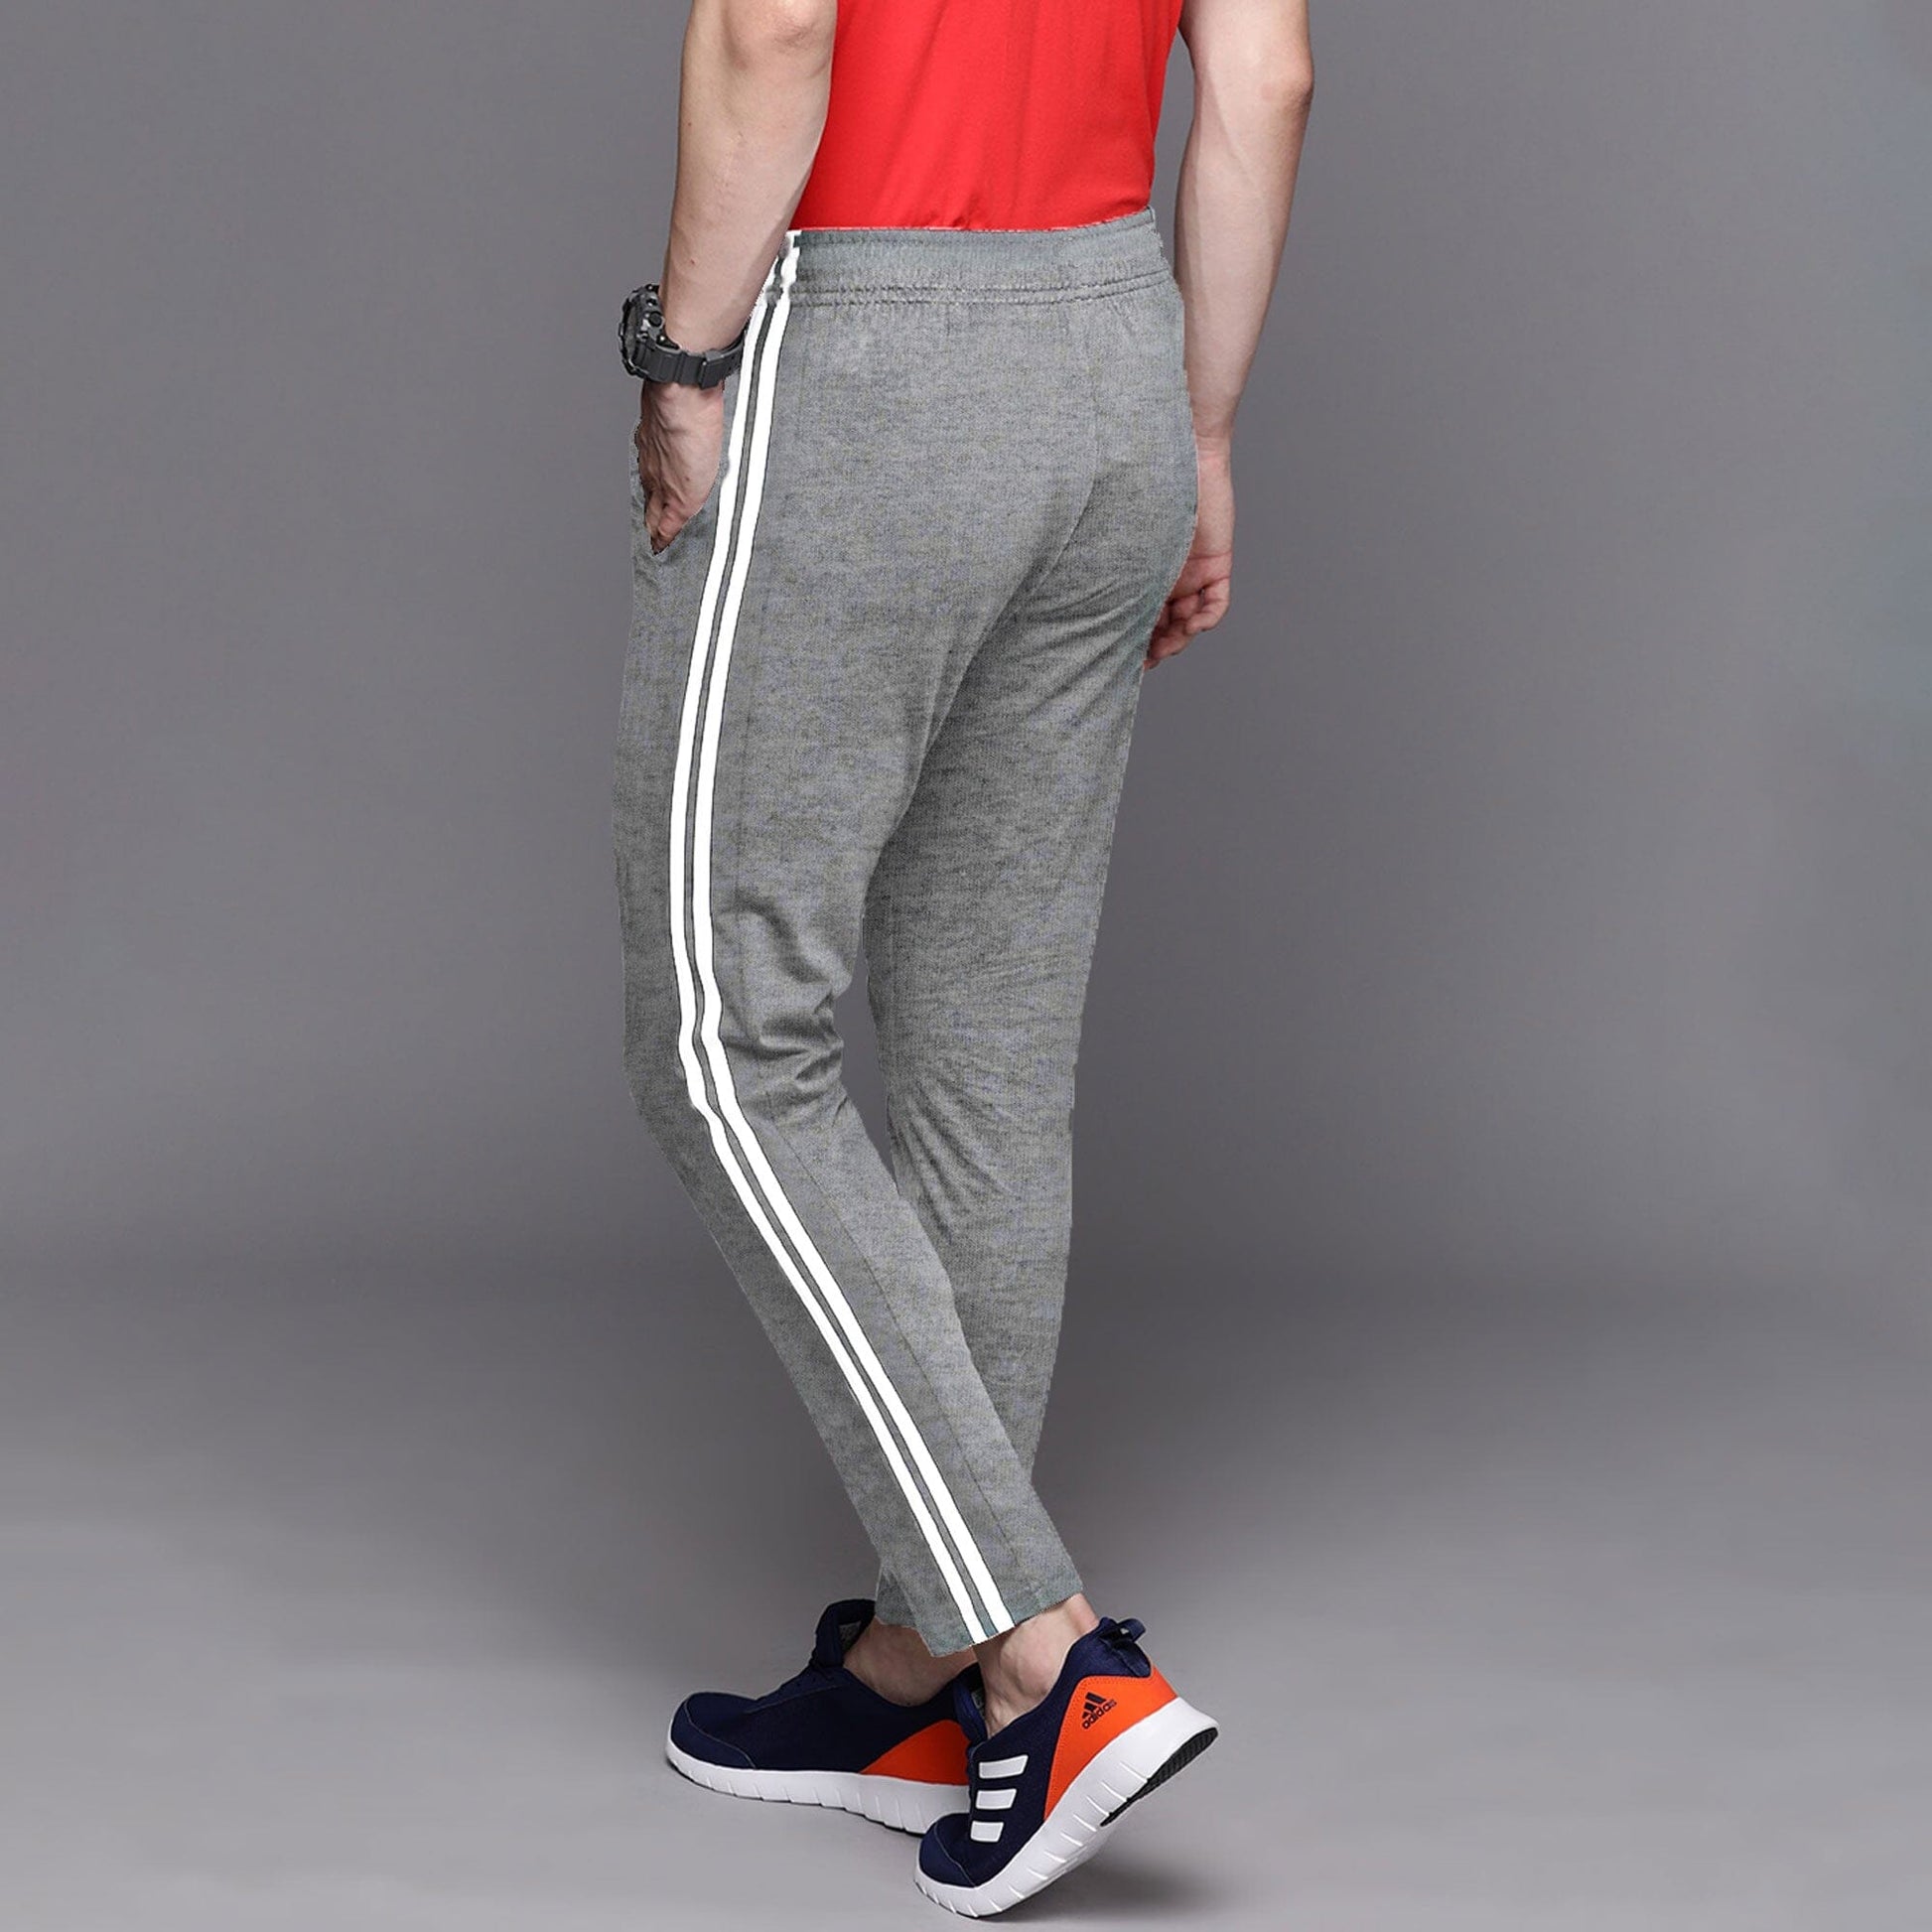 Poler Chitose Men's Super Soft Striped Trousers Men's Trousers IBT 